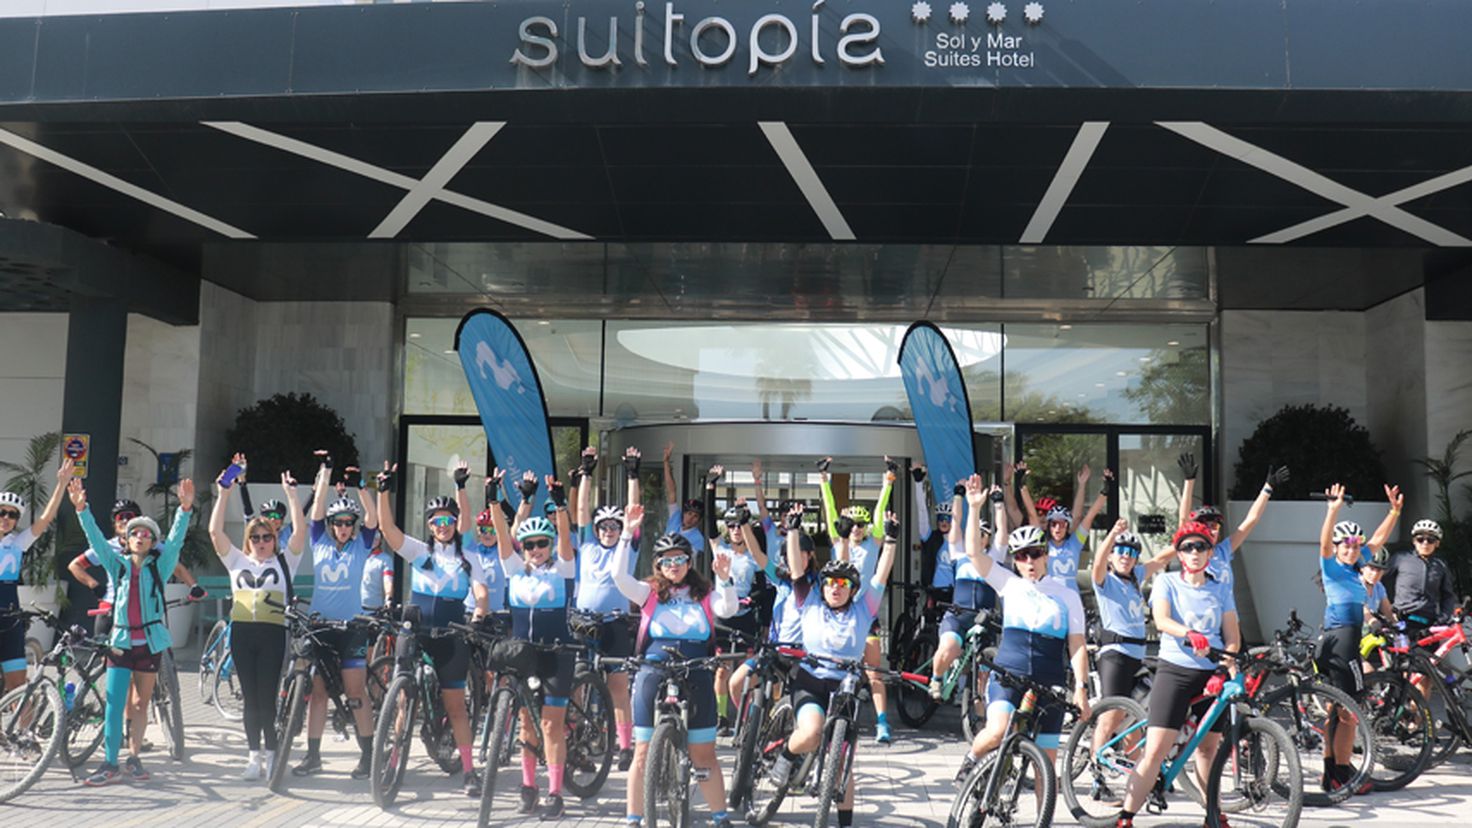 The Hotel Suitopia - Sol y Mar Suites hosts the new Women In Bike event
